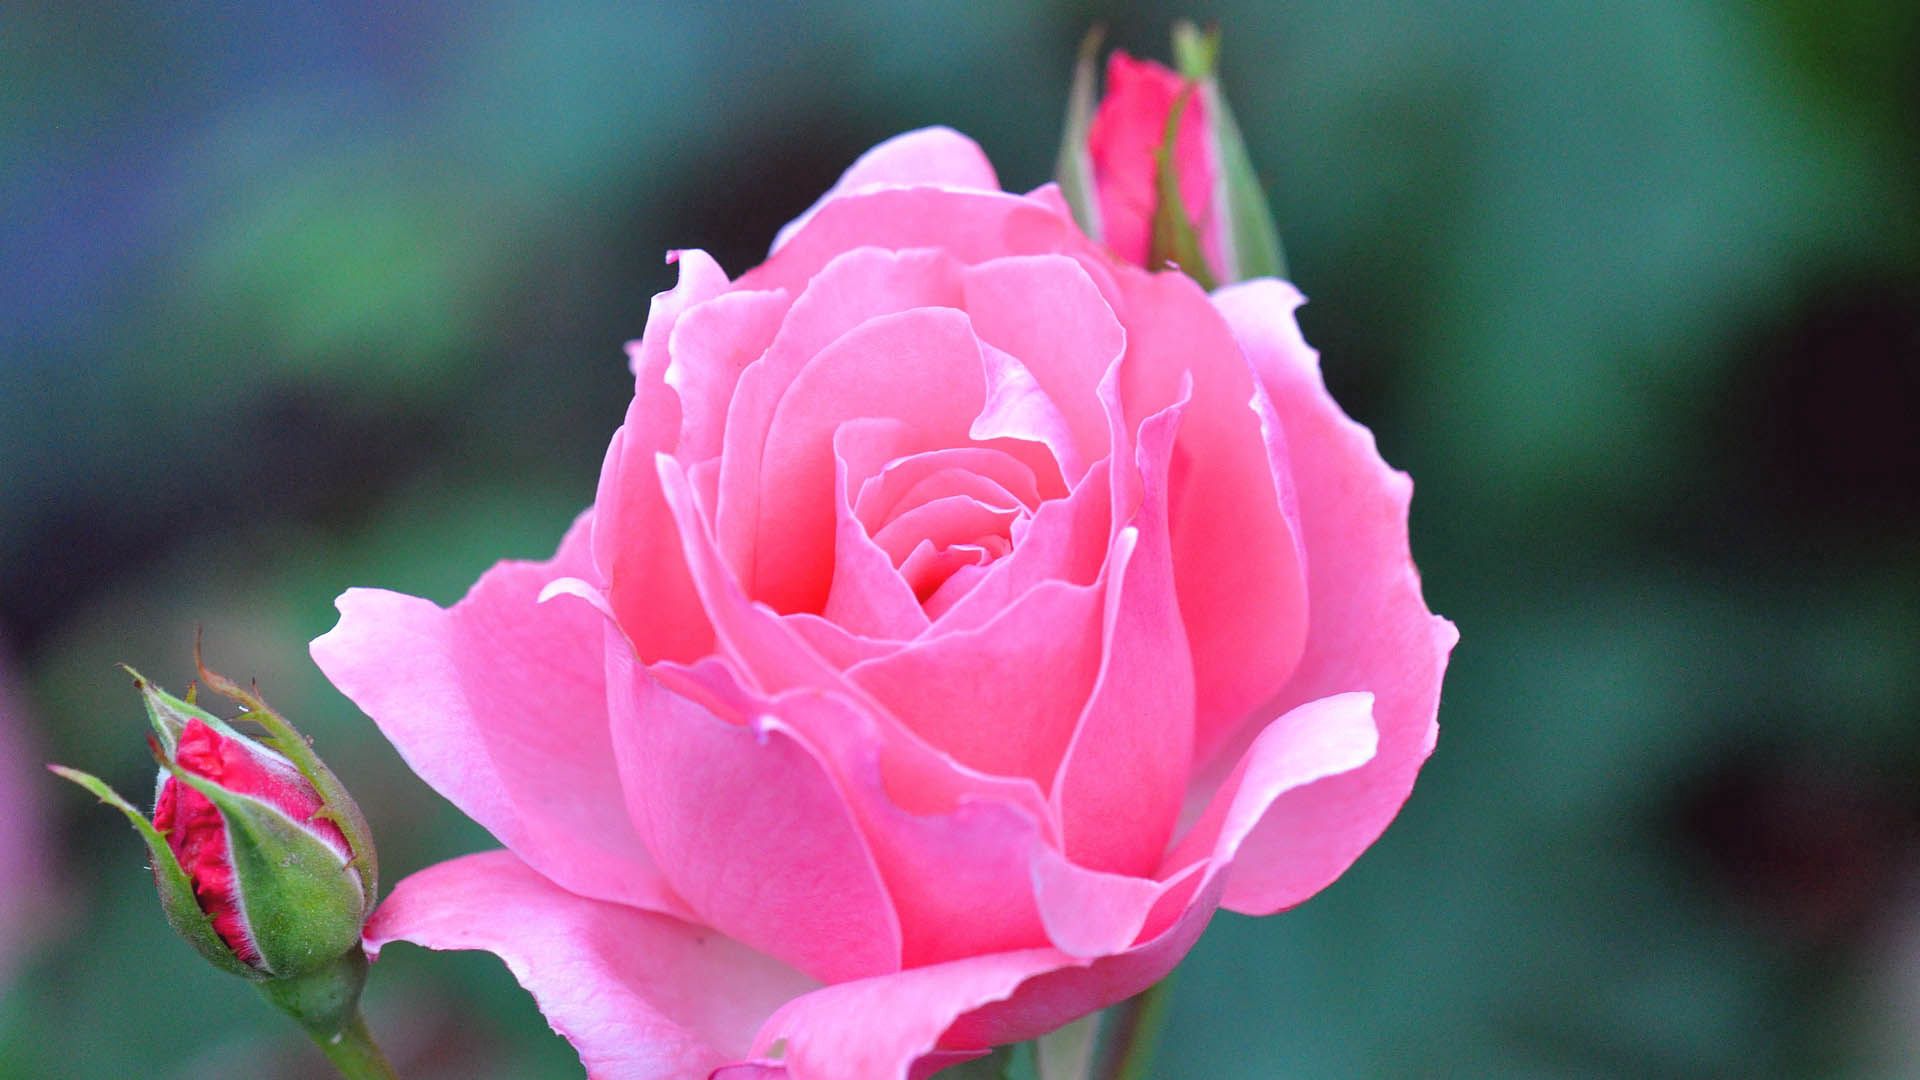 rose flower, flowers, rose, pink home screen for smartphone